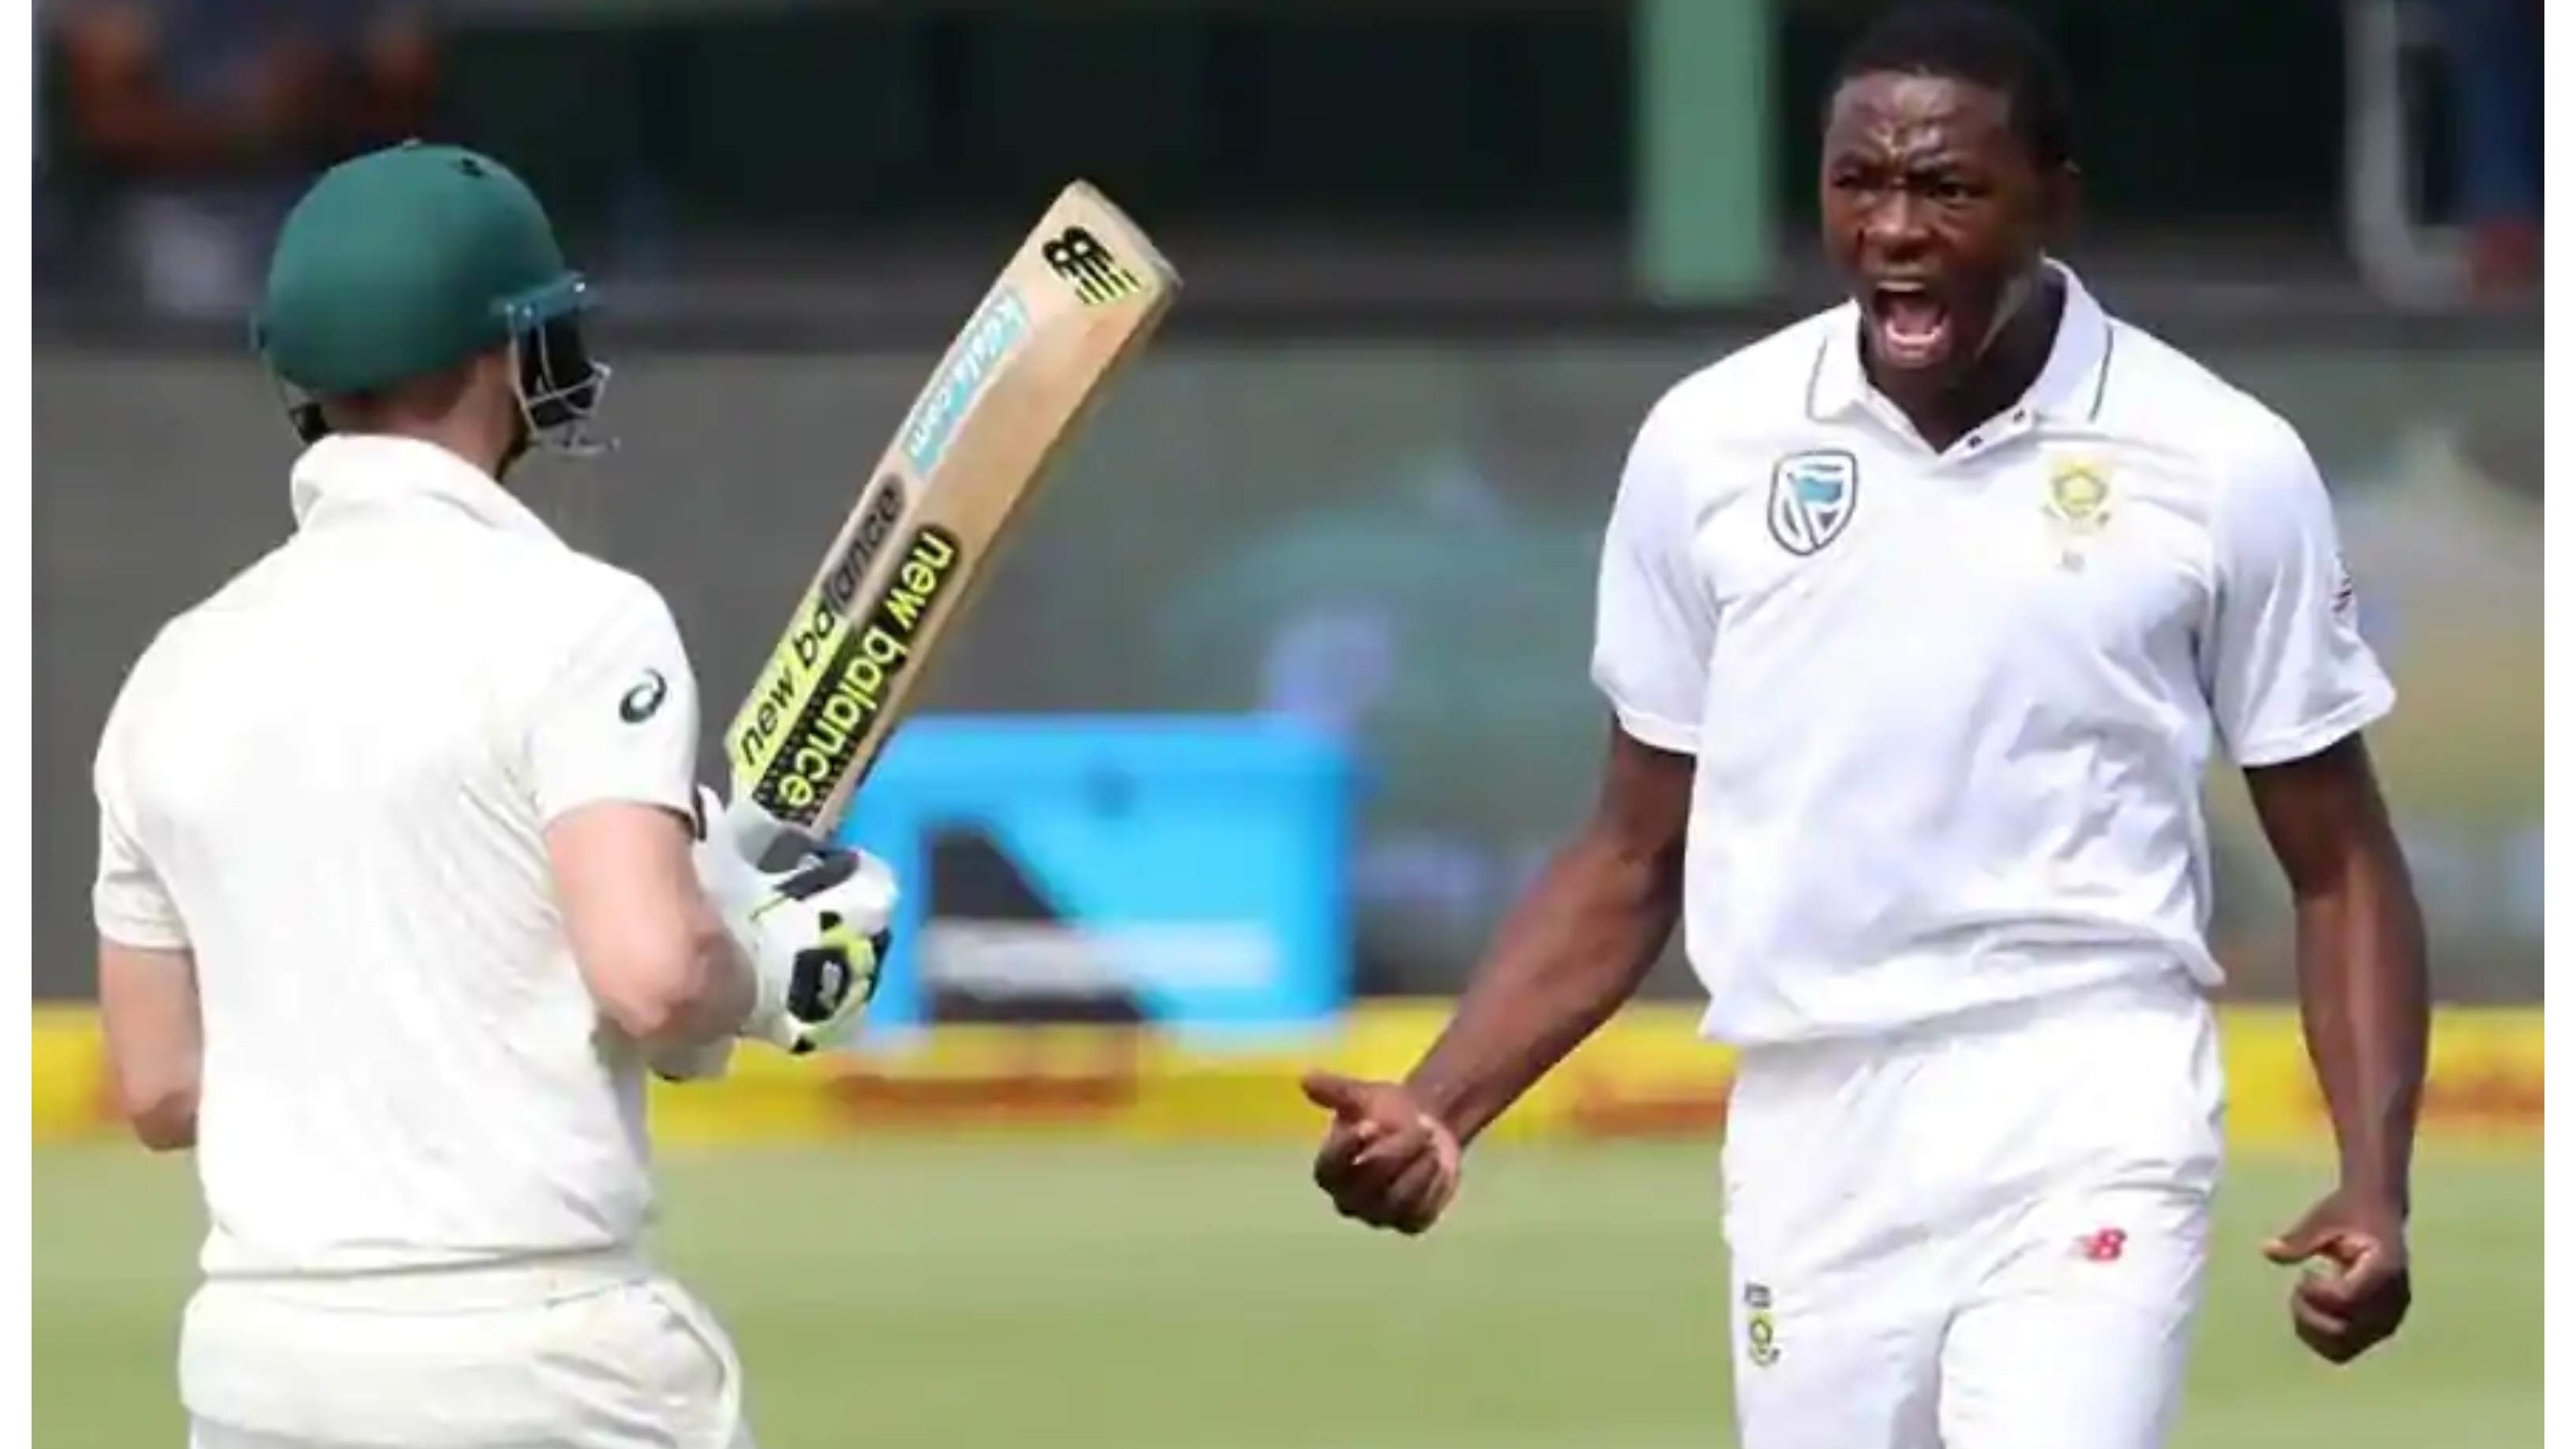 ‘No fast bowler is going to be nice to a batter’ – Rabada clears misconception regarding his short temper